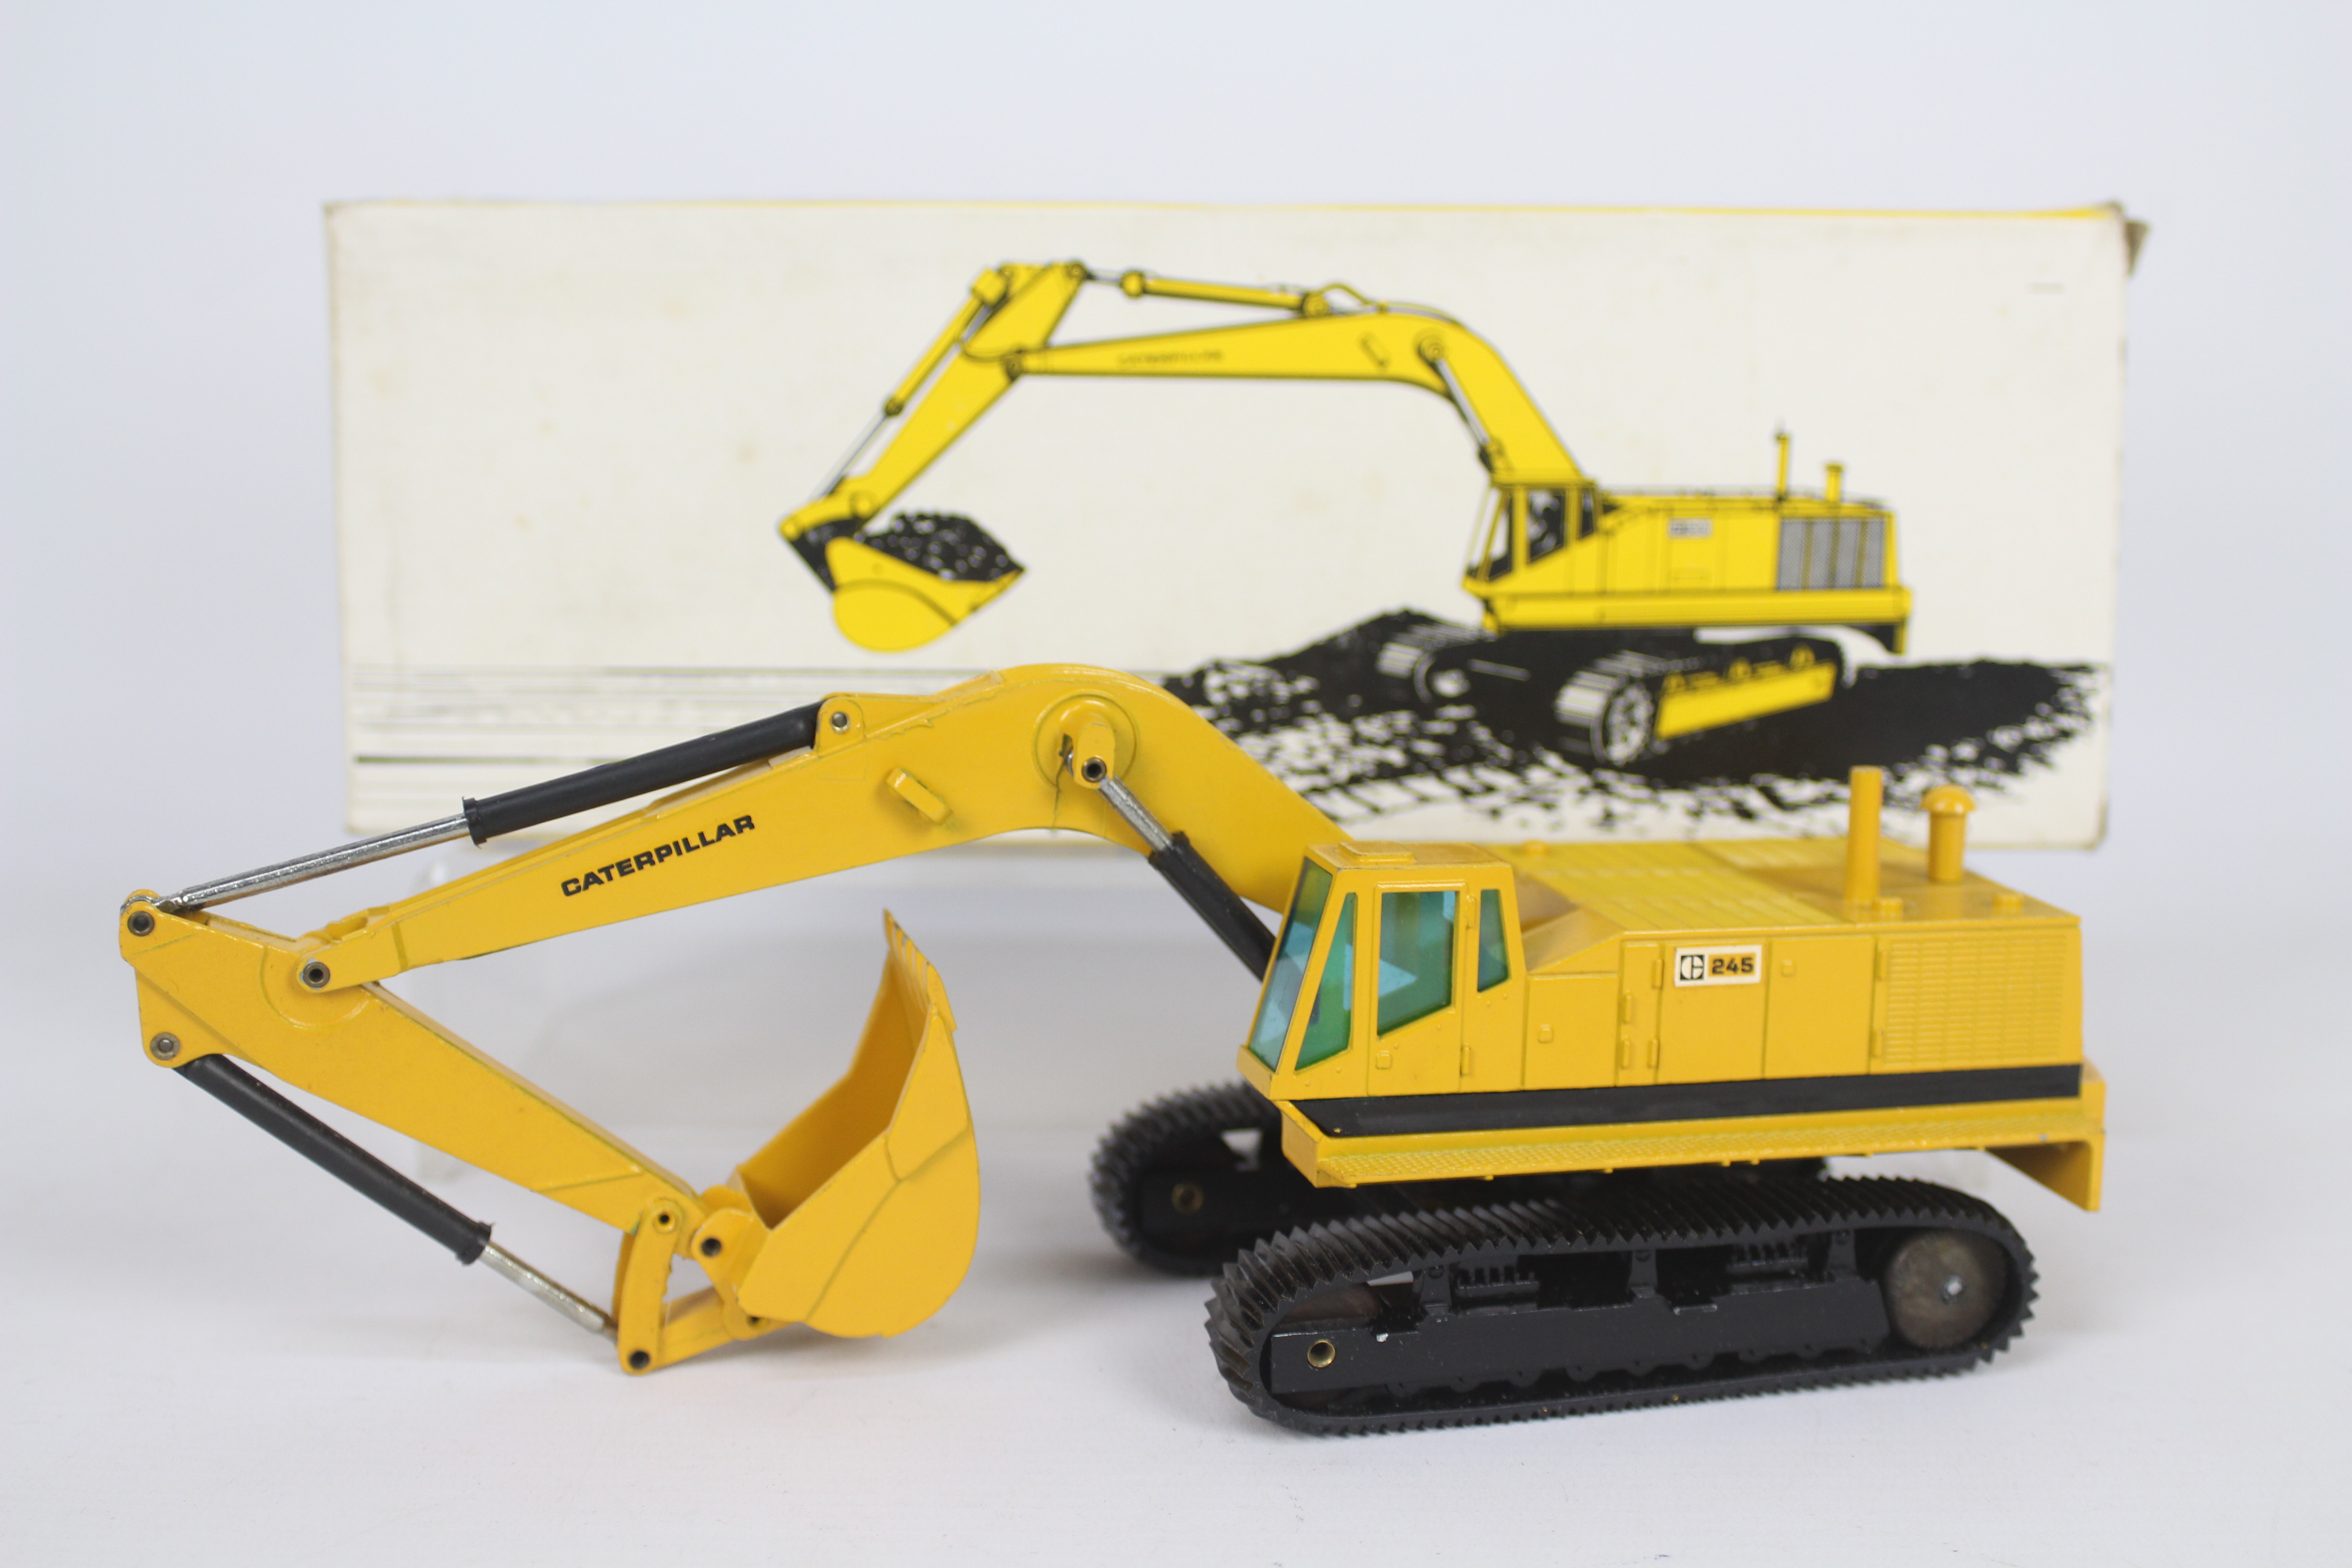 NZG - A boxed CAT 245 Hydraulikbagger excavator in 1:50 scale. # 160.